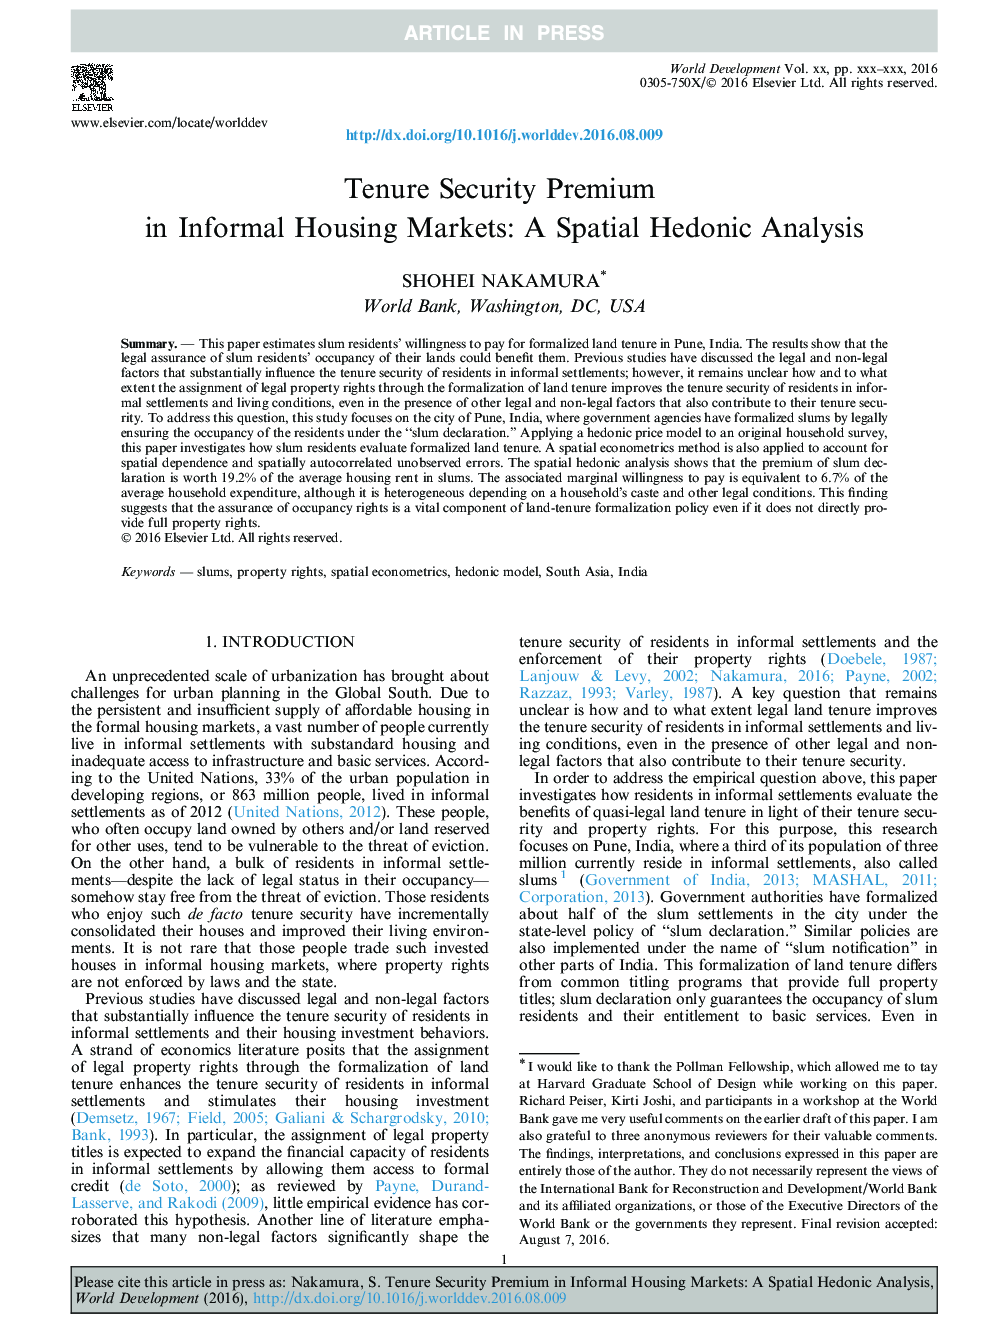 Tenure Security Premium in Informal Housing Markets: A Spatial Hedonic Analysis